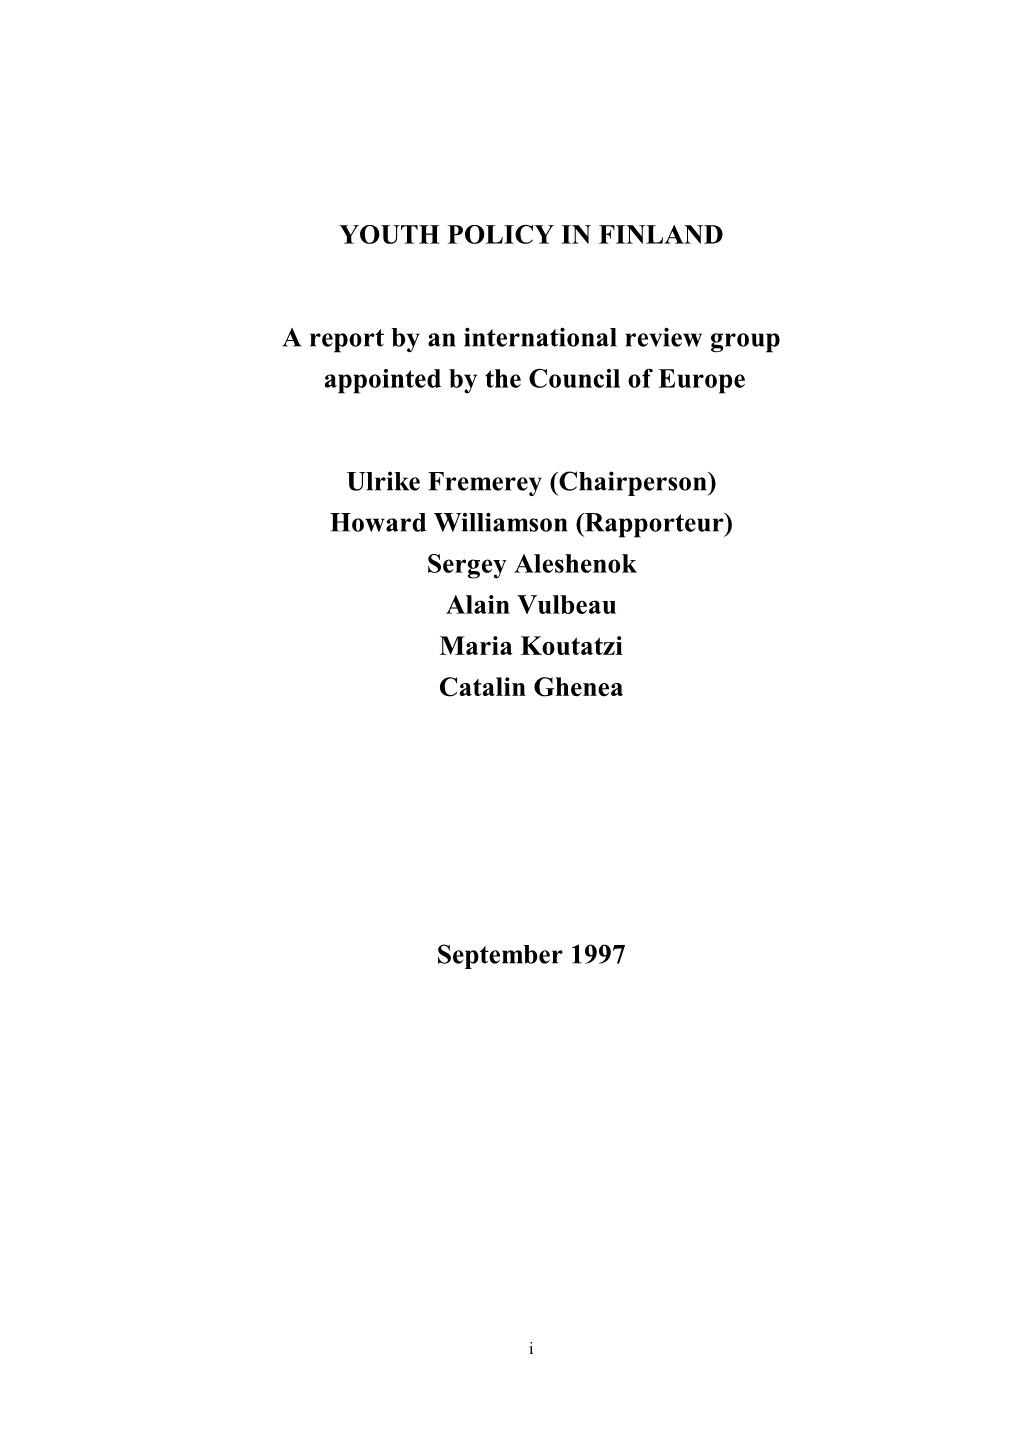 YOUTH POLICY in FINLAND a Report by an International Review Group Appointed by the Council of Europe Ulrike Fremerey